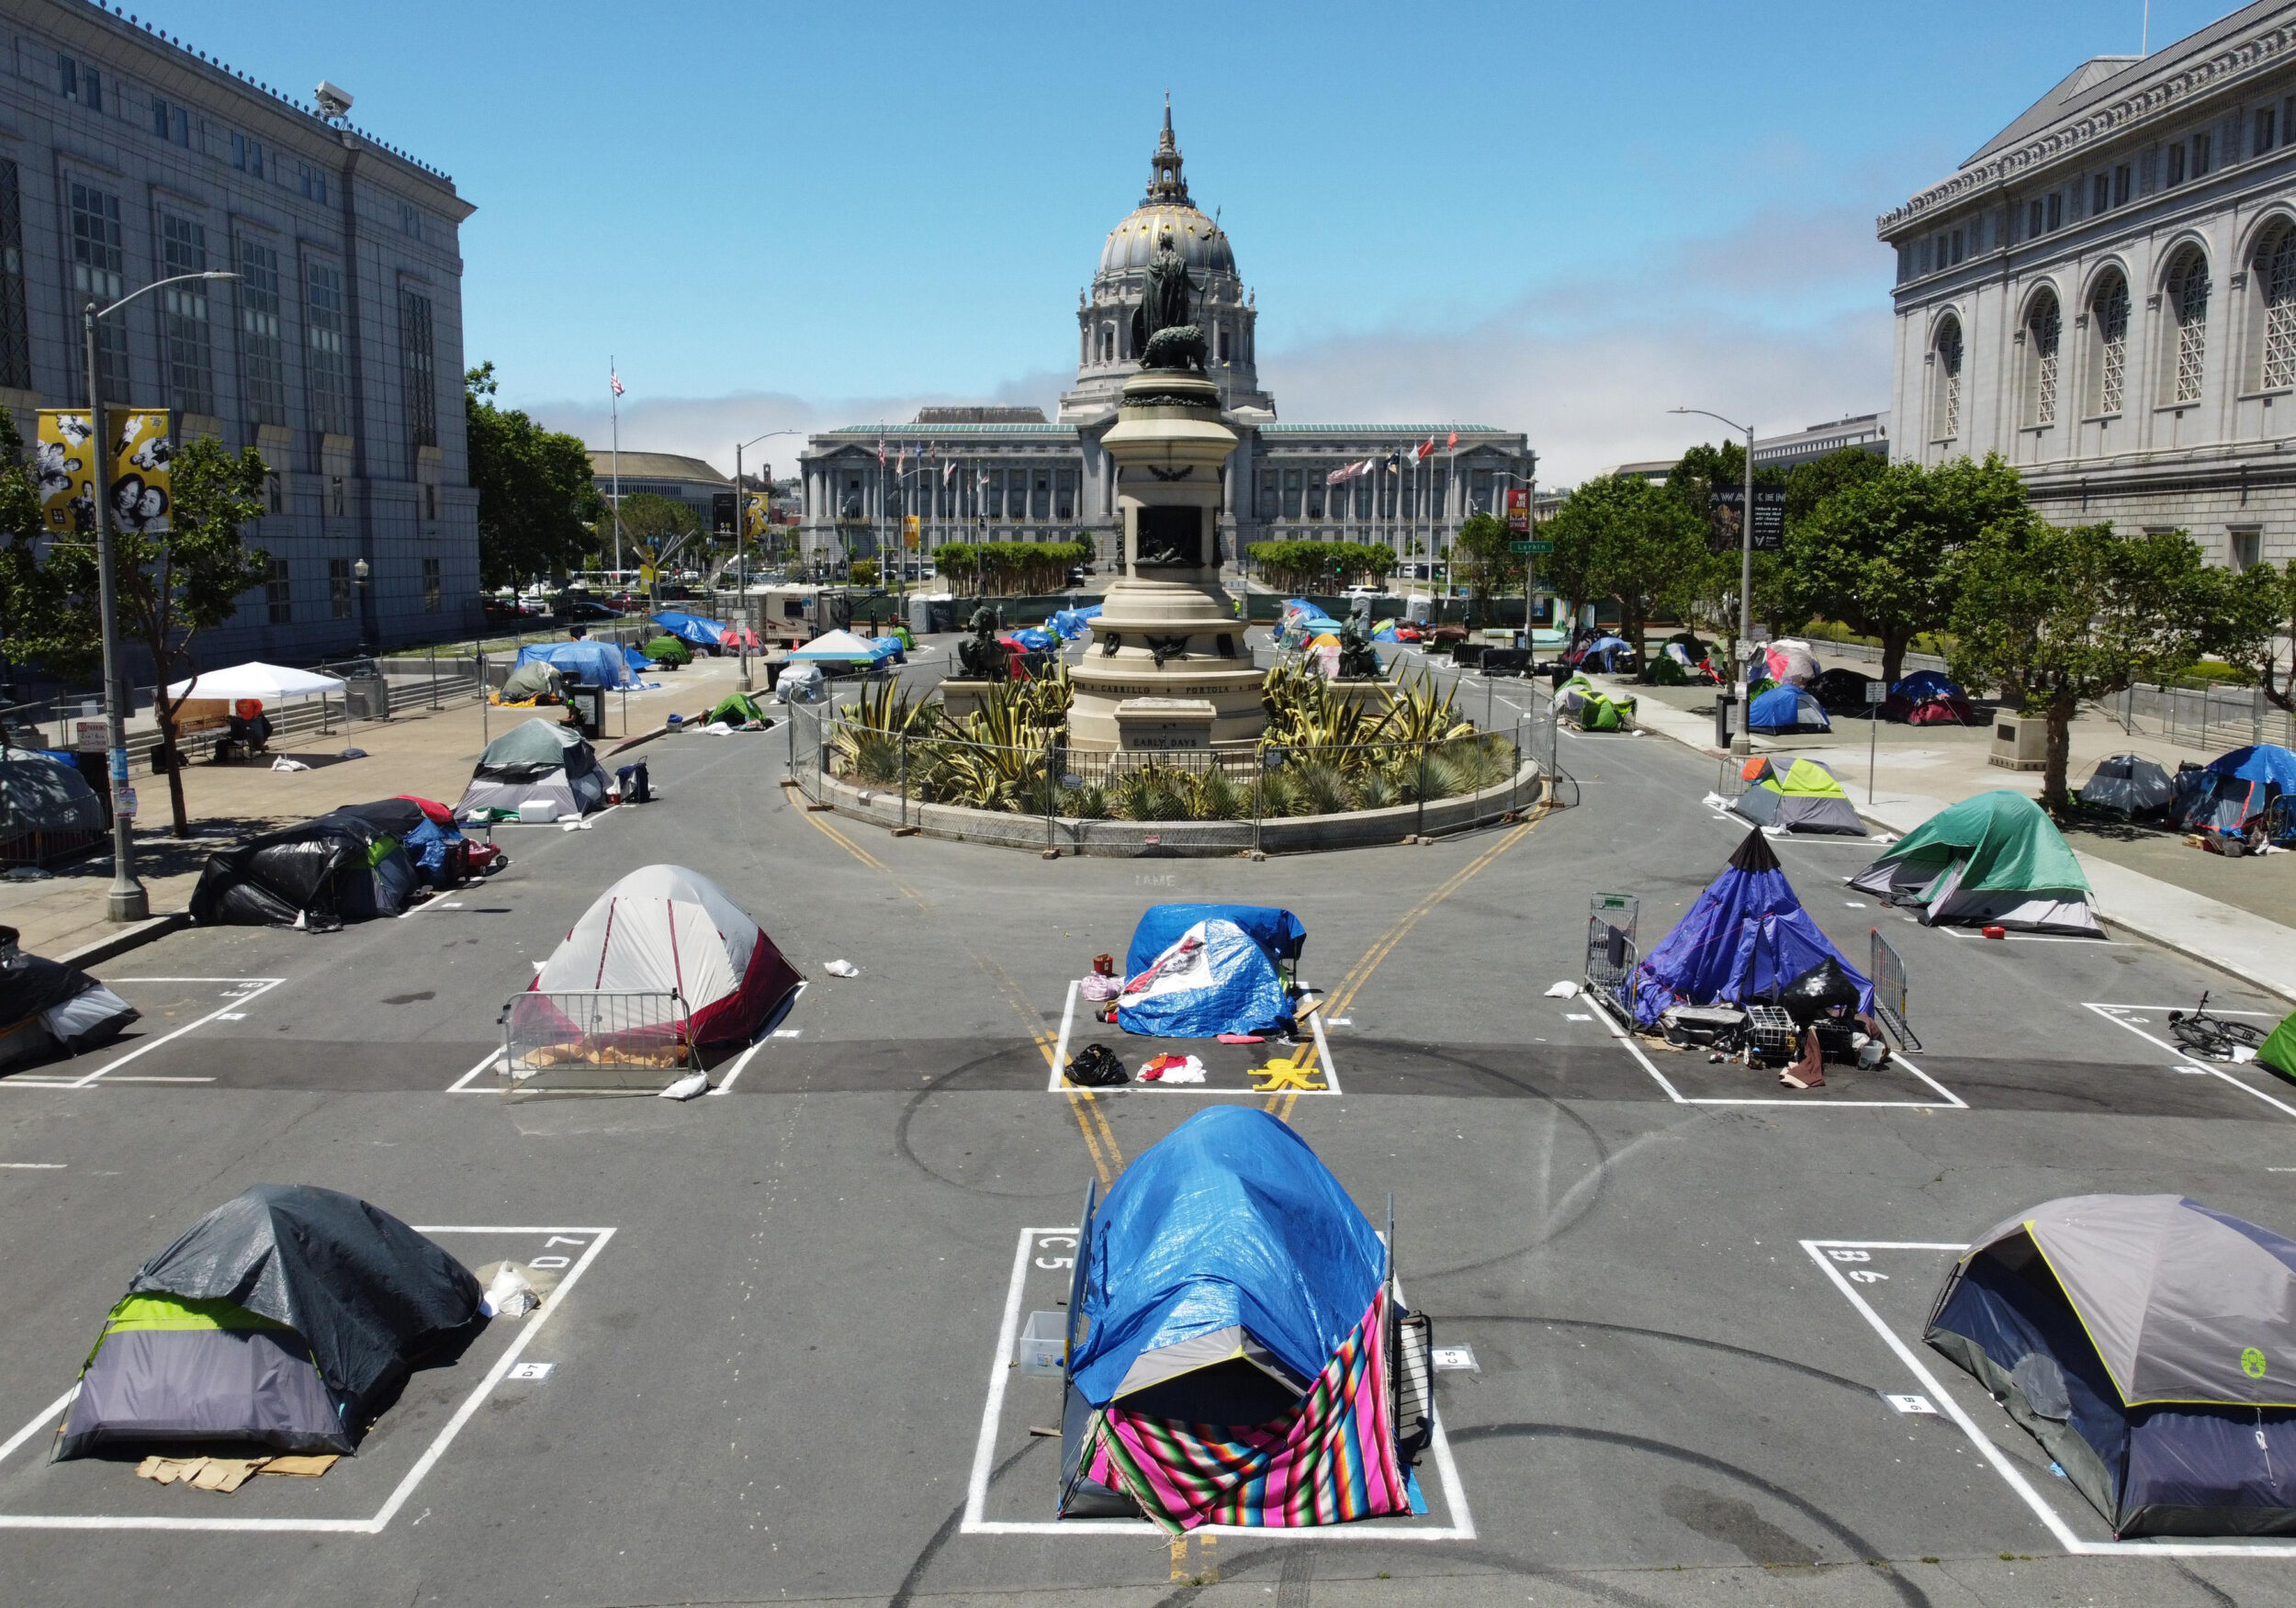 San Francisco City Hall in the distance with tents in the foreground.